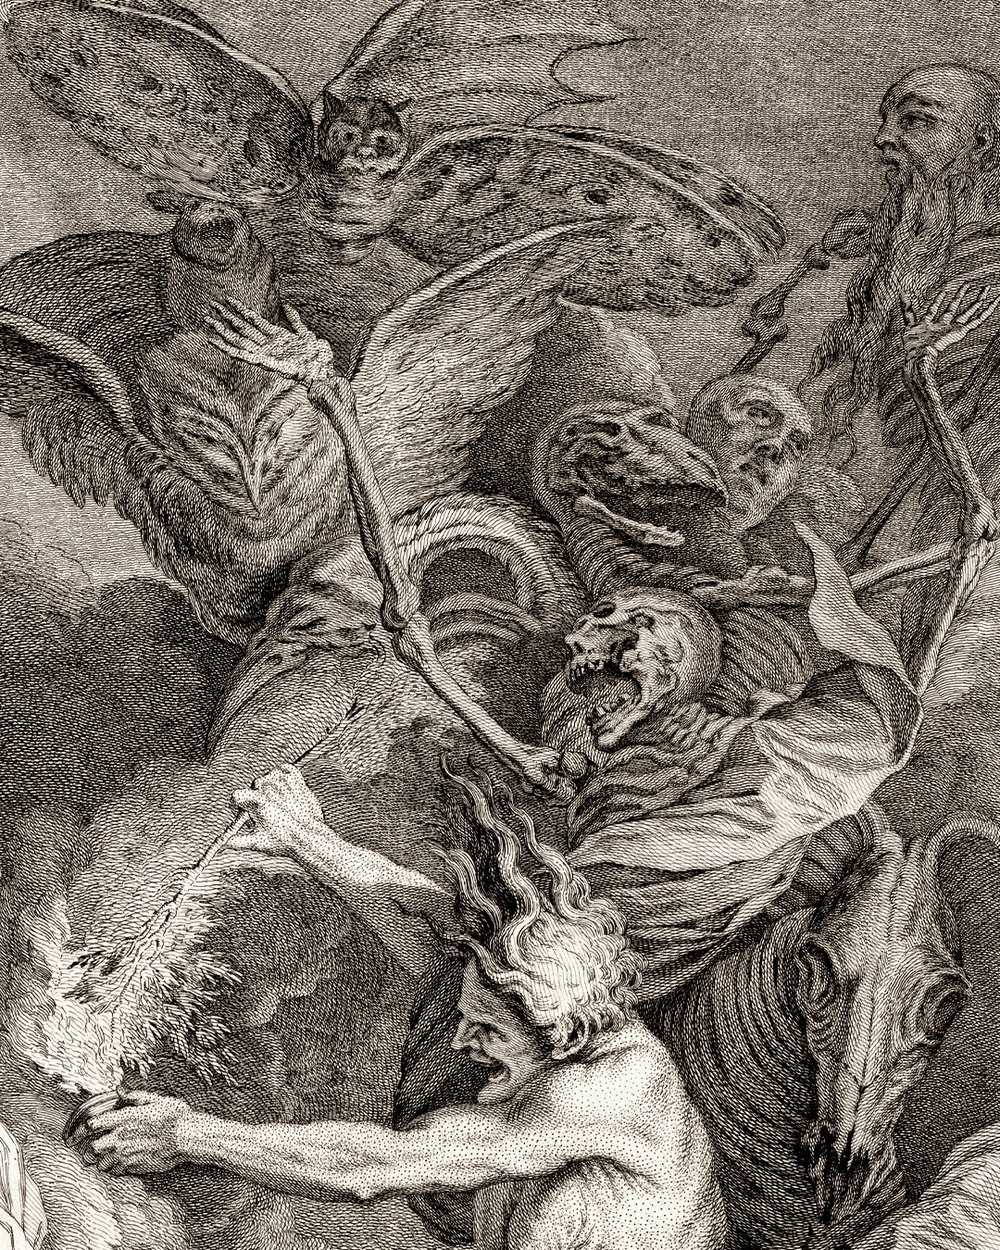 "Saul with the witch of Endor" (1718 - 1747)